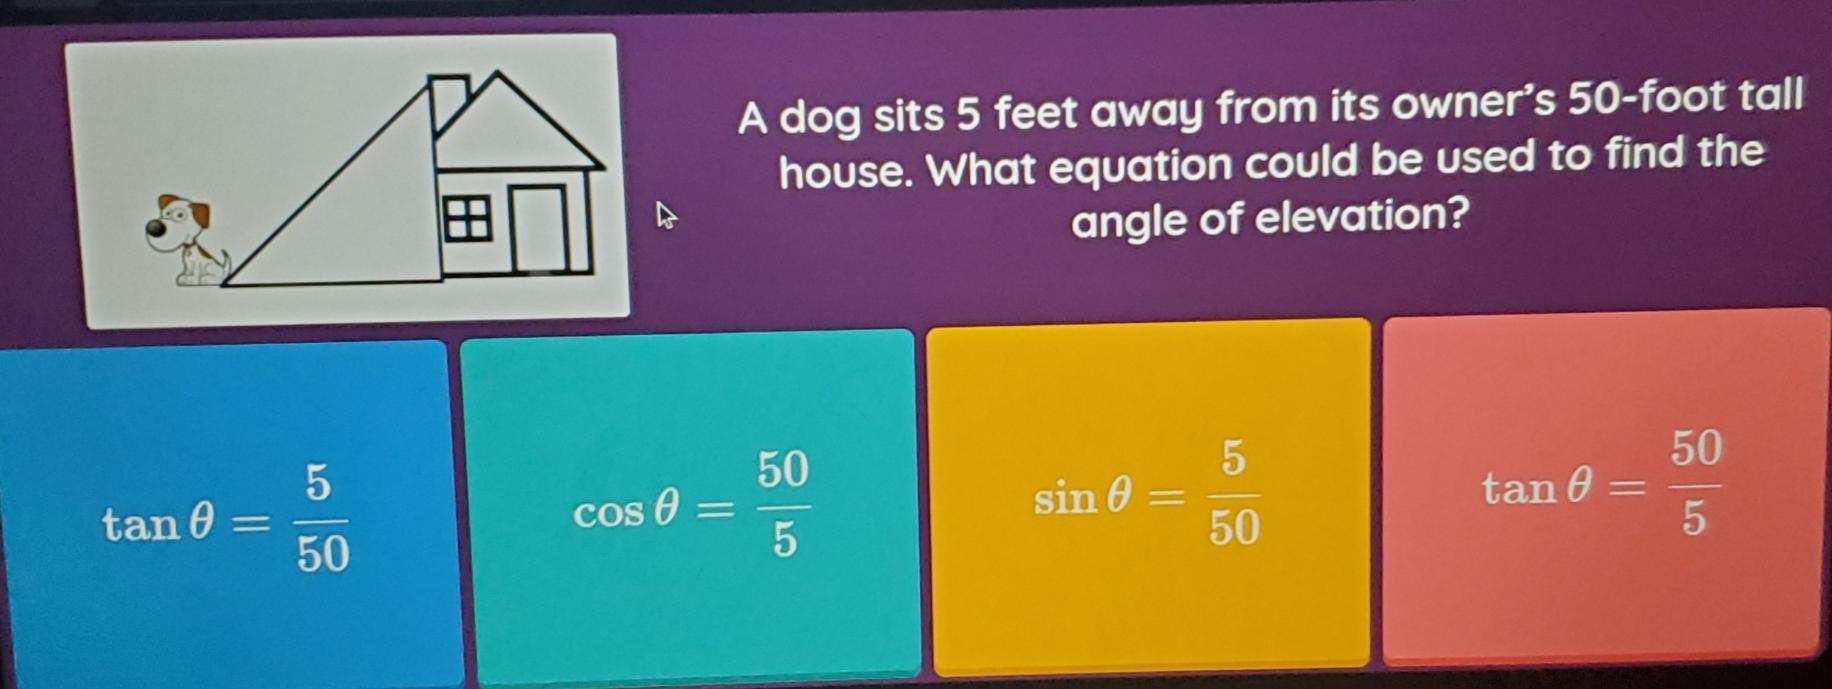 A Dog Alte 5 Feet Away From Its Owner's 50-foot Tall House. What Equation Could Be Used To Find The Angle